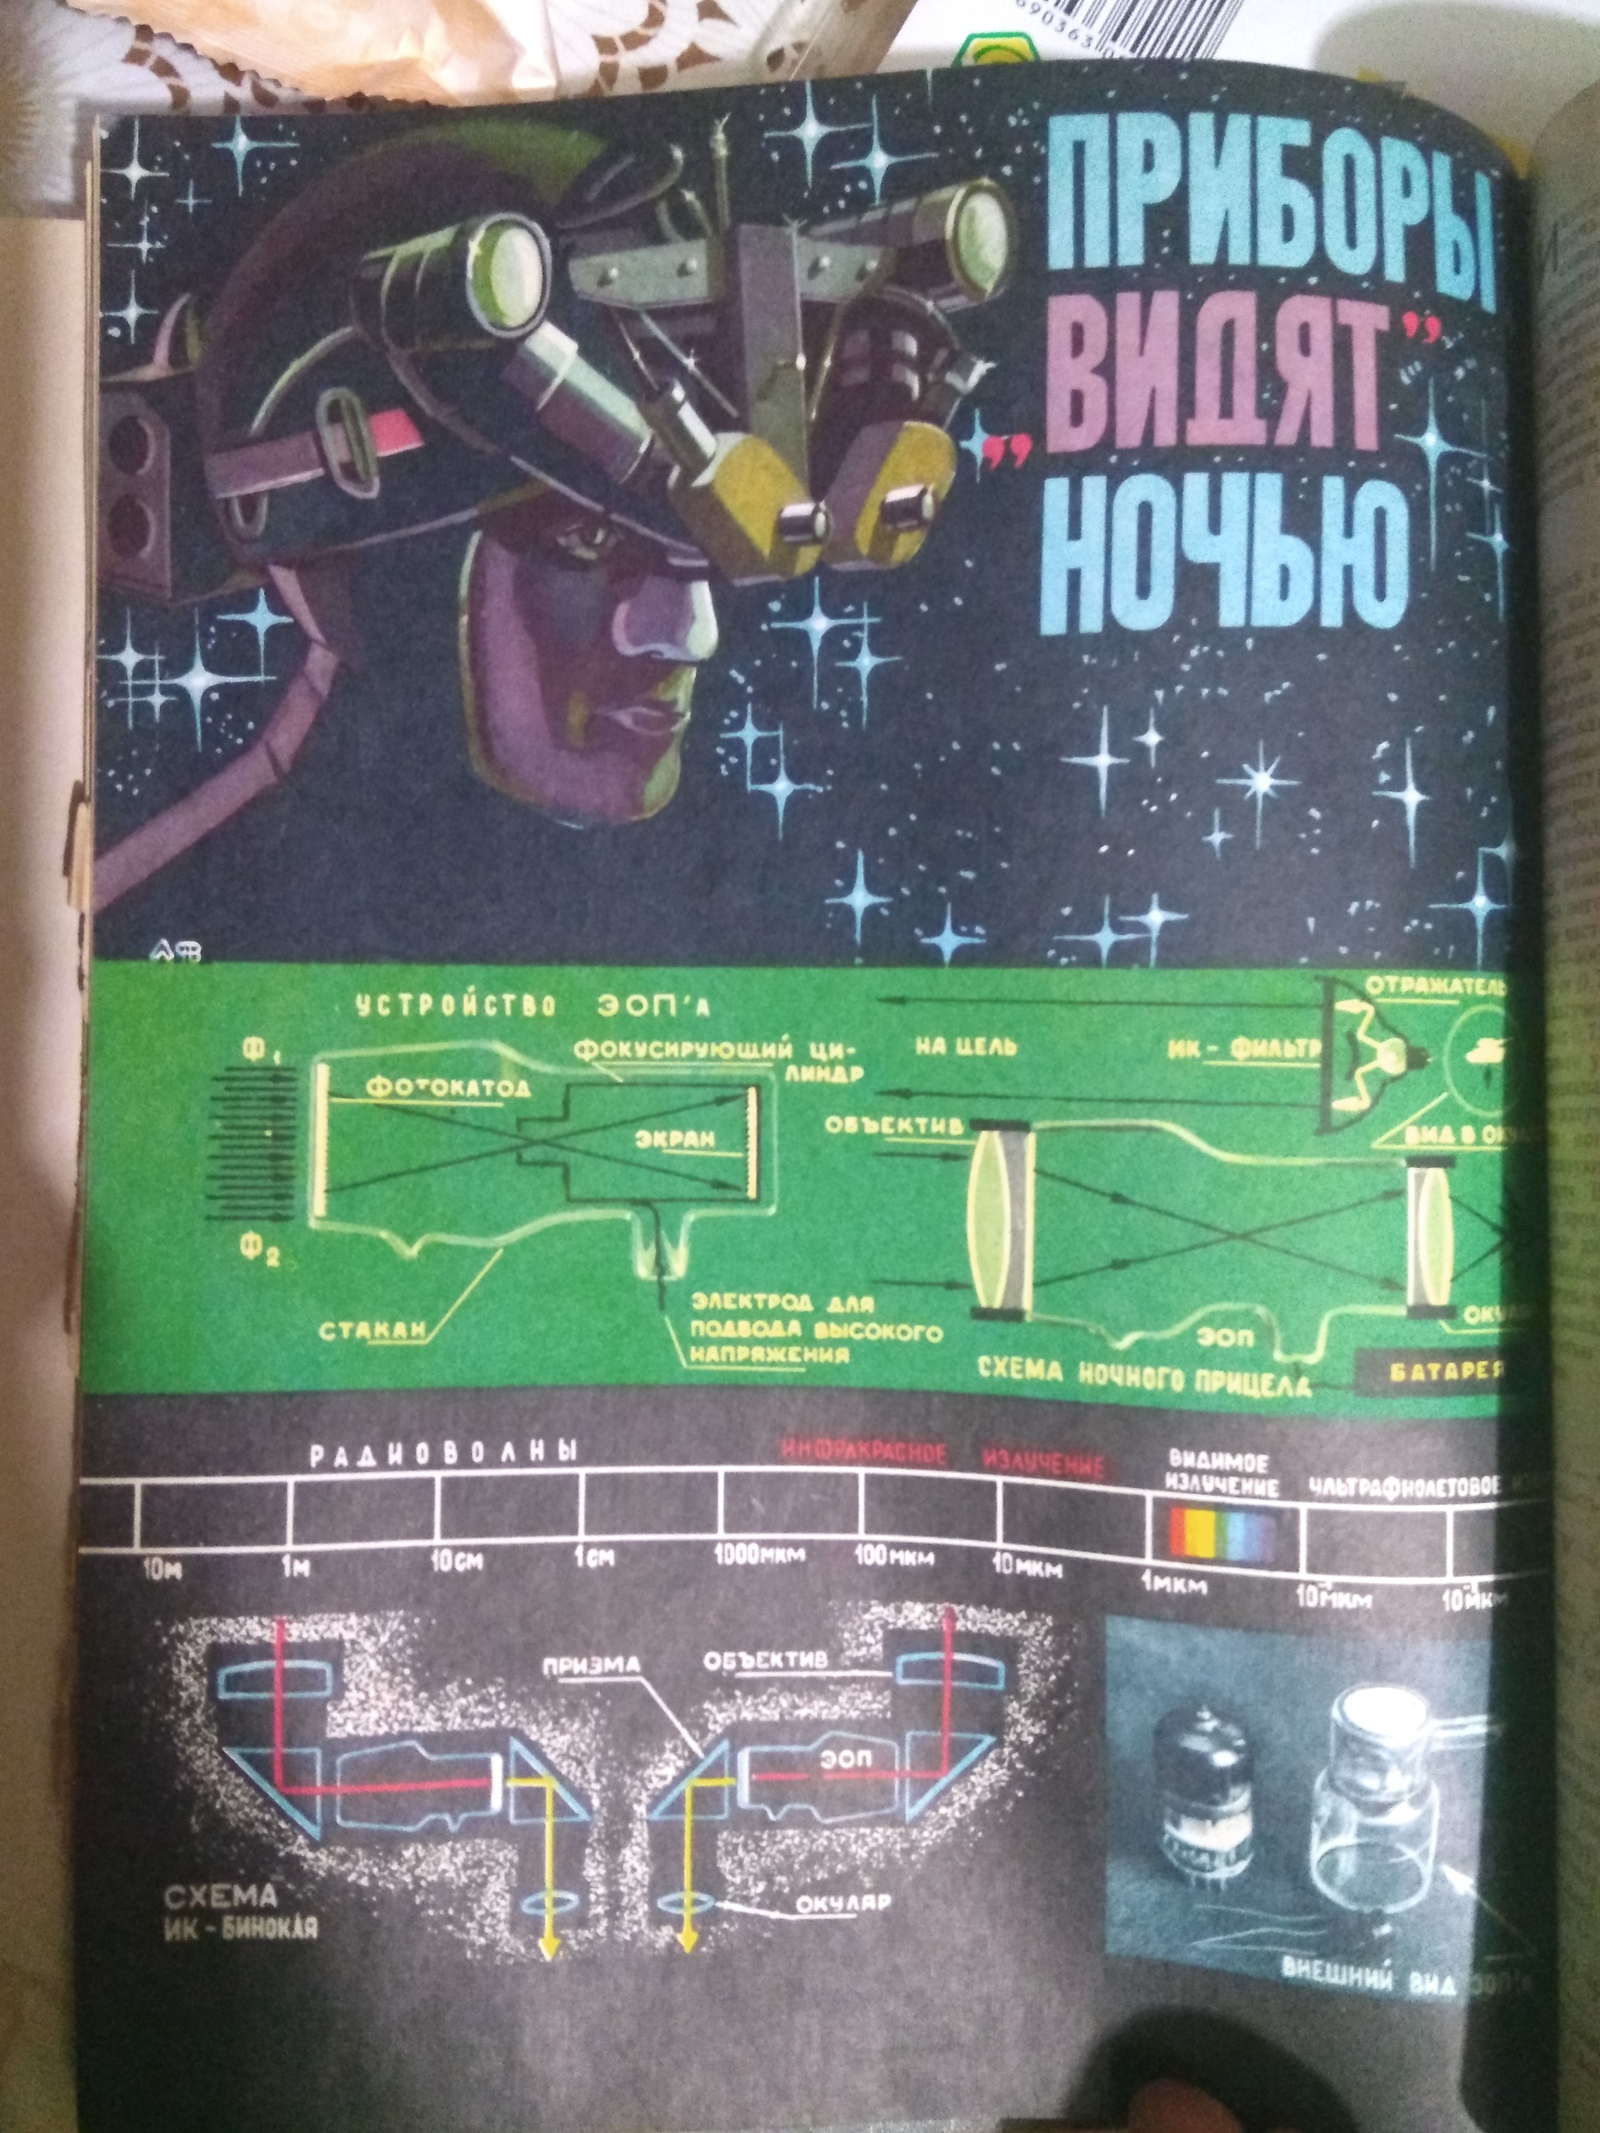 Technology news in the USSR - My, Books, Find, the USSR, Night-vision device, Dacha, Images